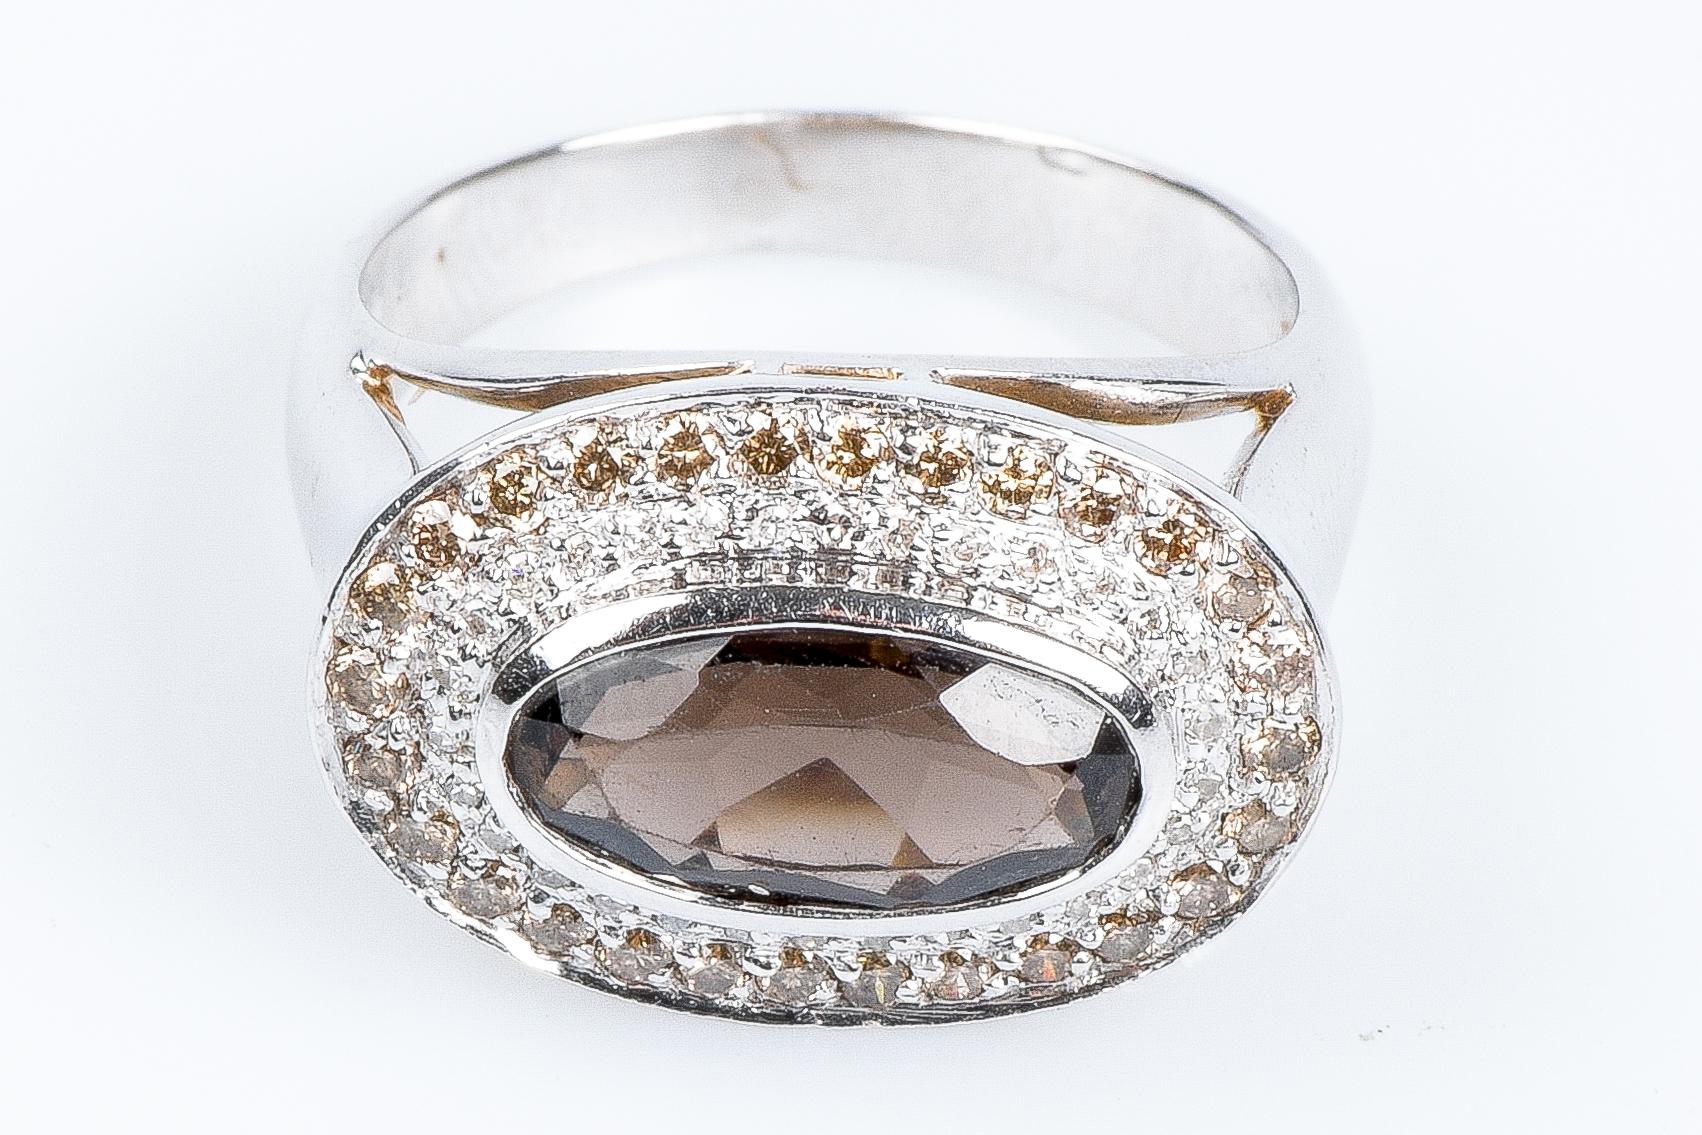 18-carat gold ring with 1 0.38-carat oval quartz surrounded by 57 round diamonds For Sale 2